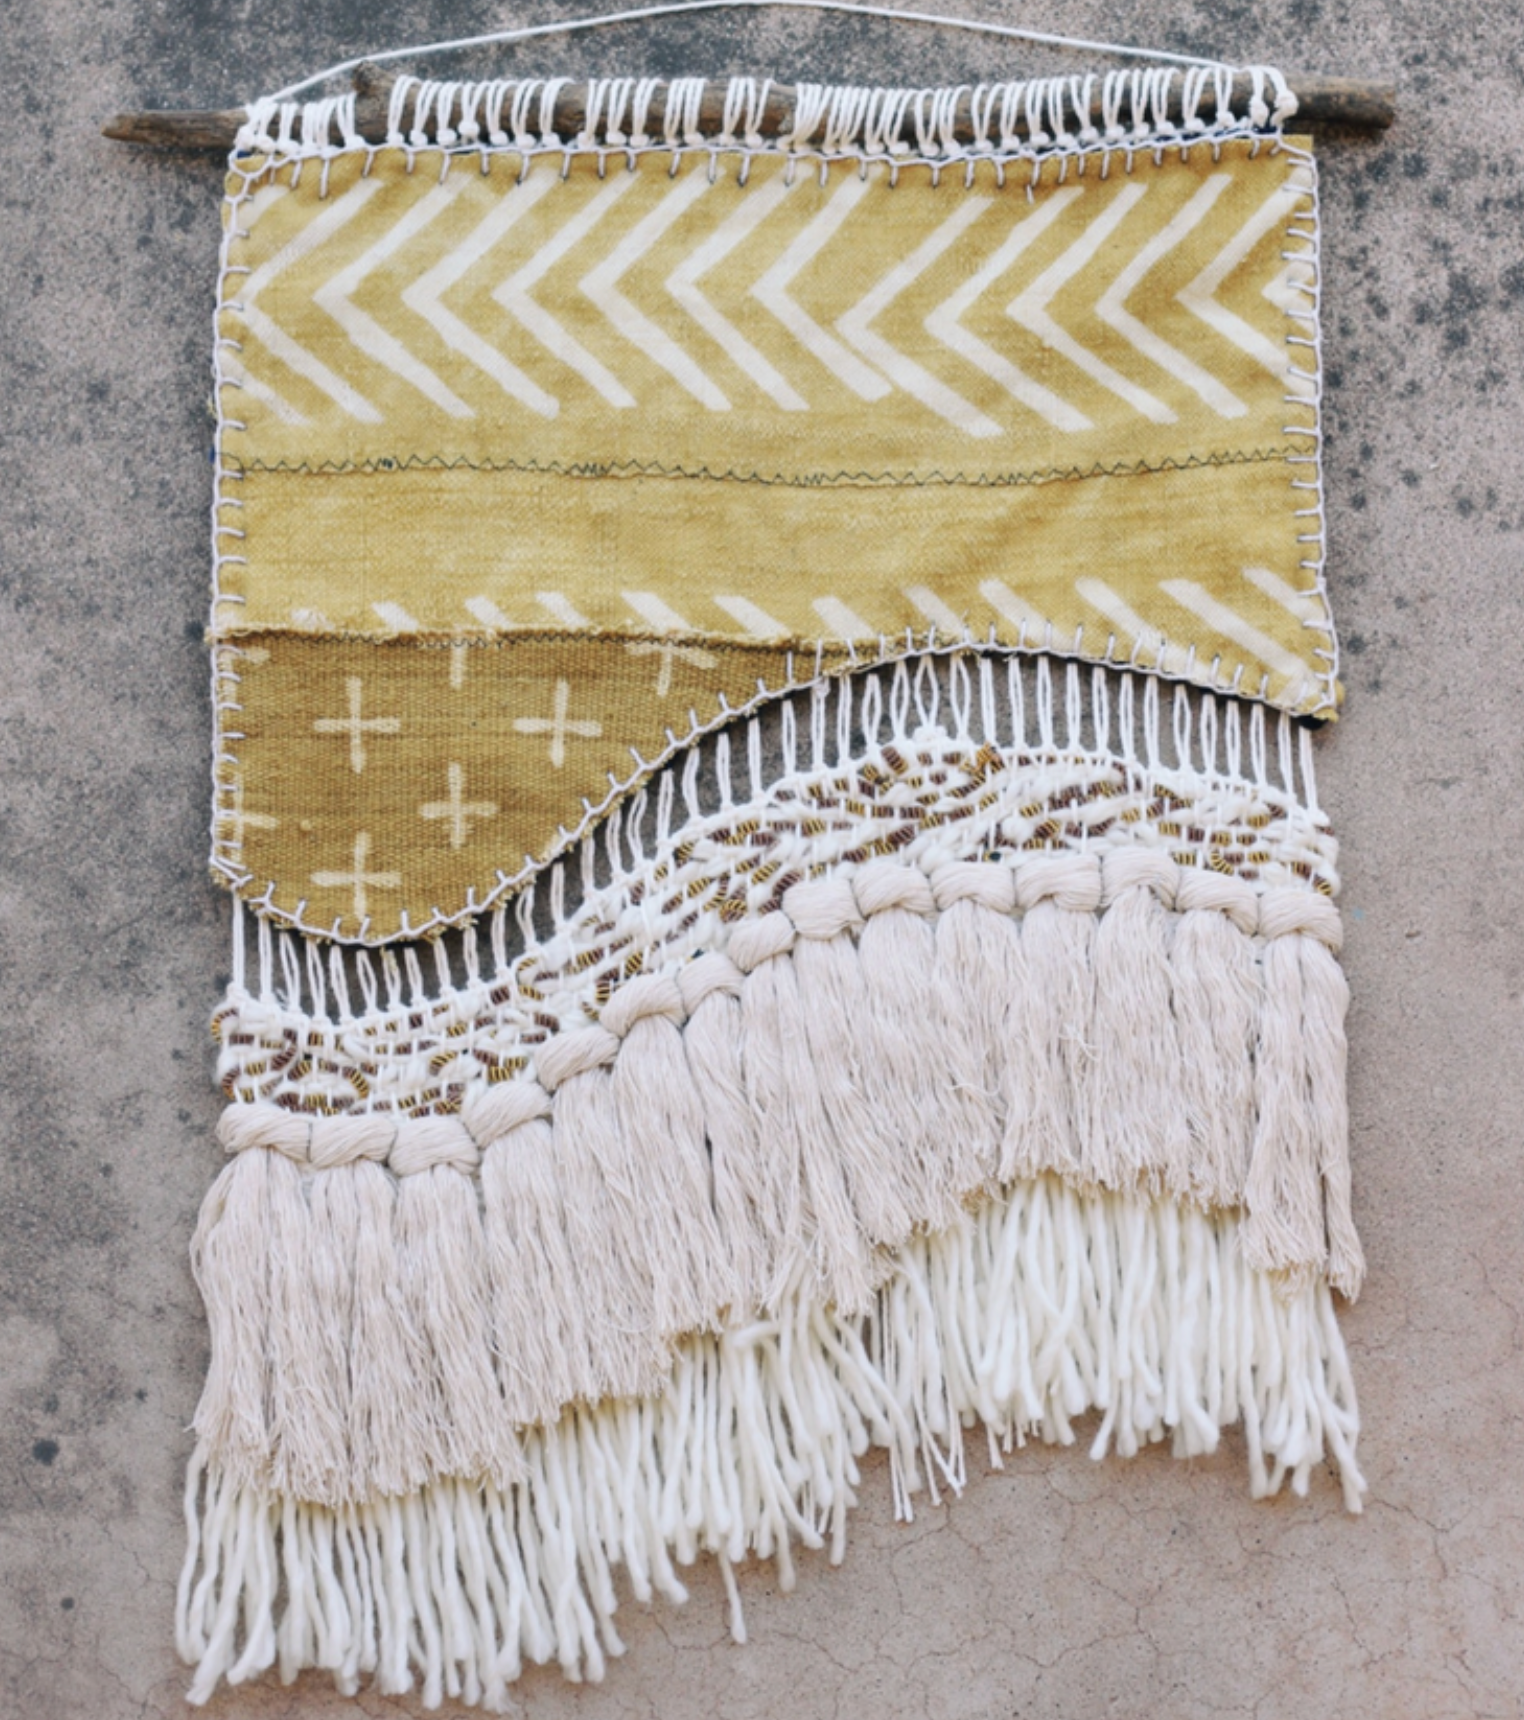 A fabric and yarn wall hanging in yellow and white